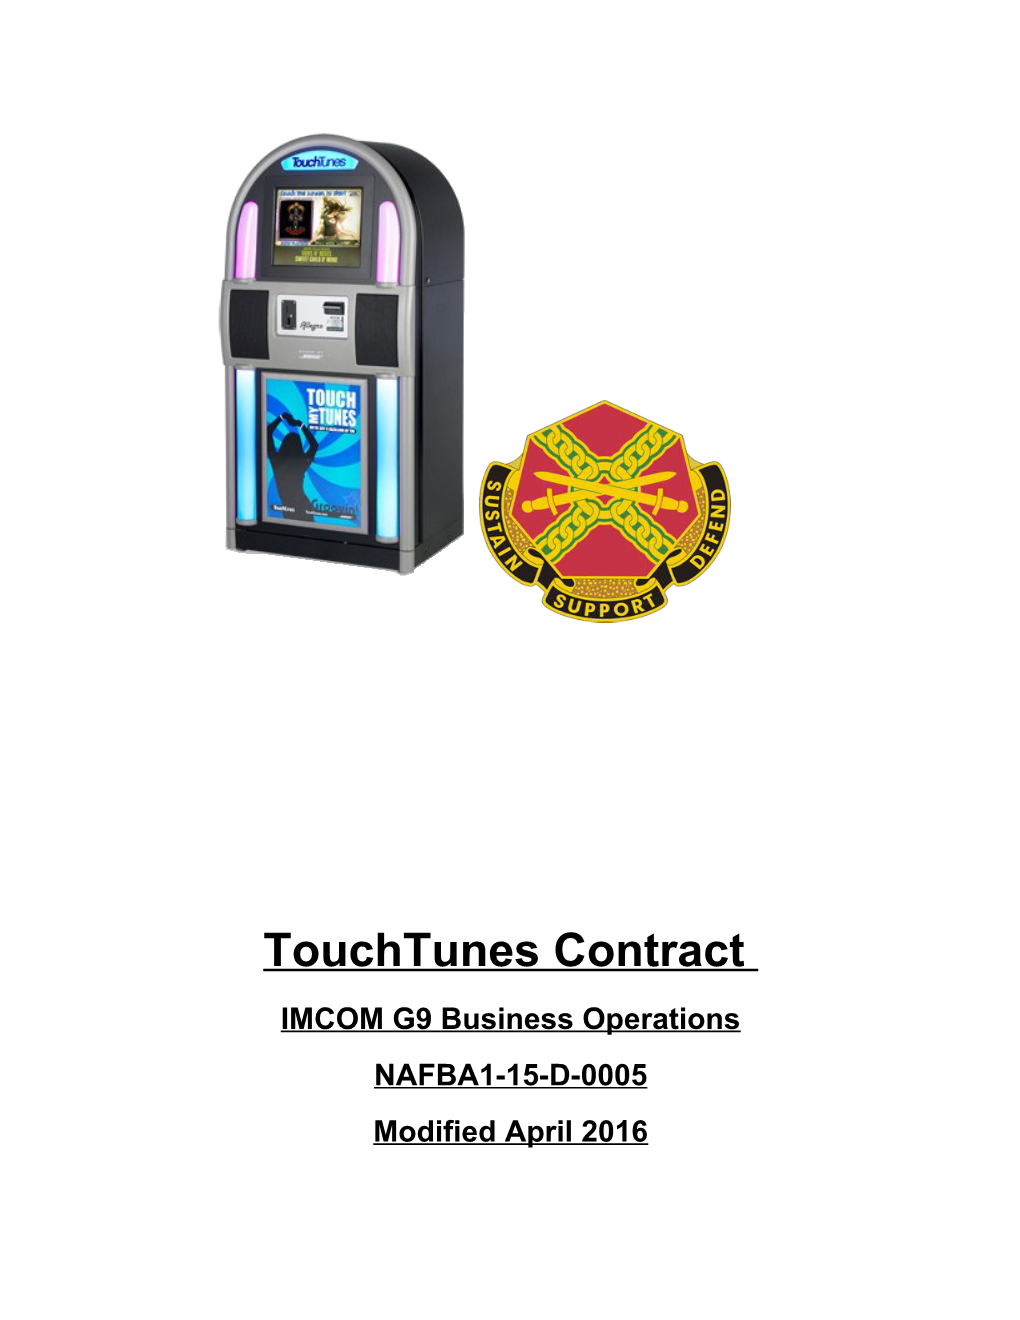 Touchtunes Contract